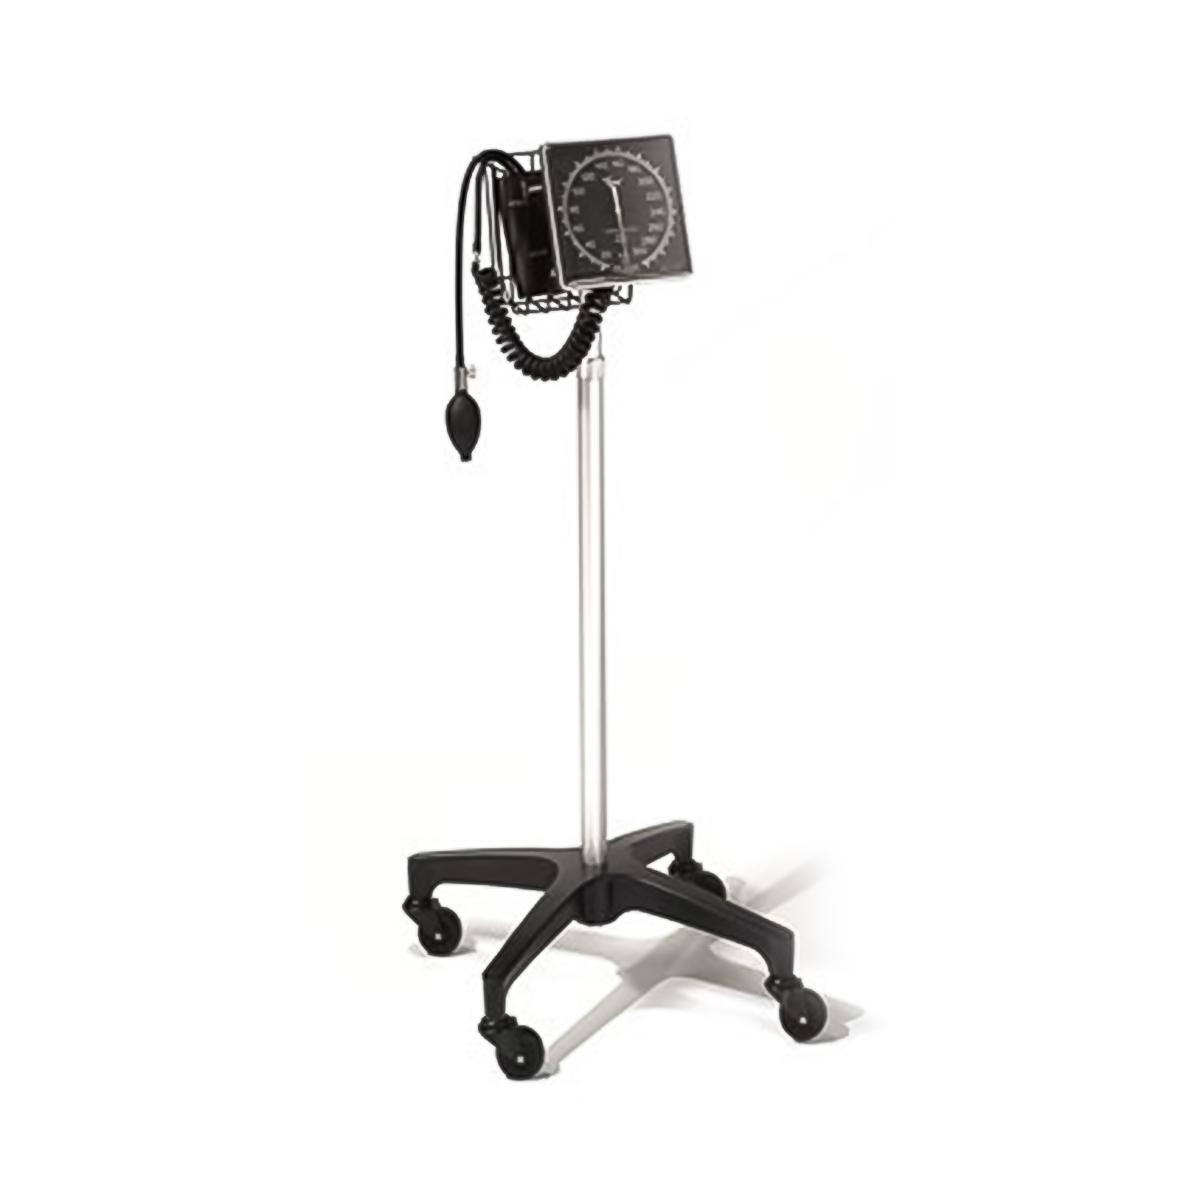 Tycos 509 Mobile Aneroid Sphygmomanometer on rolling stand, 3/4 view